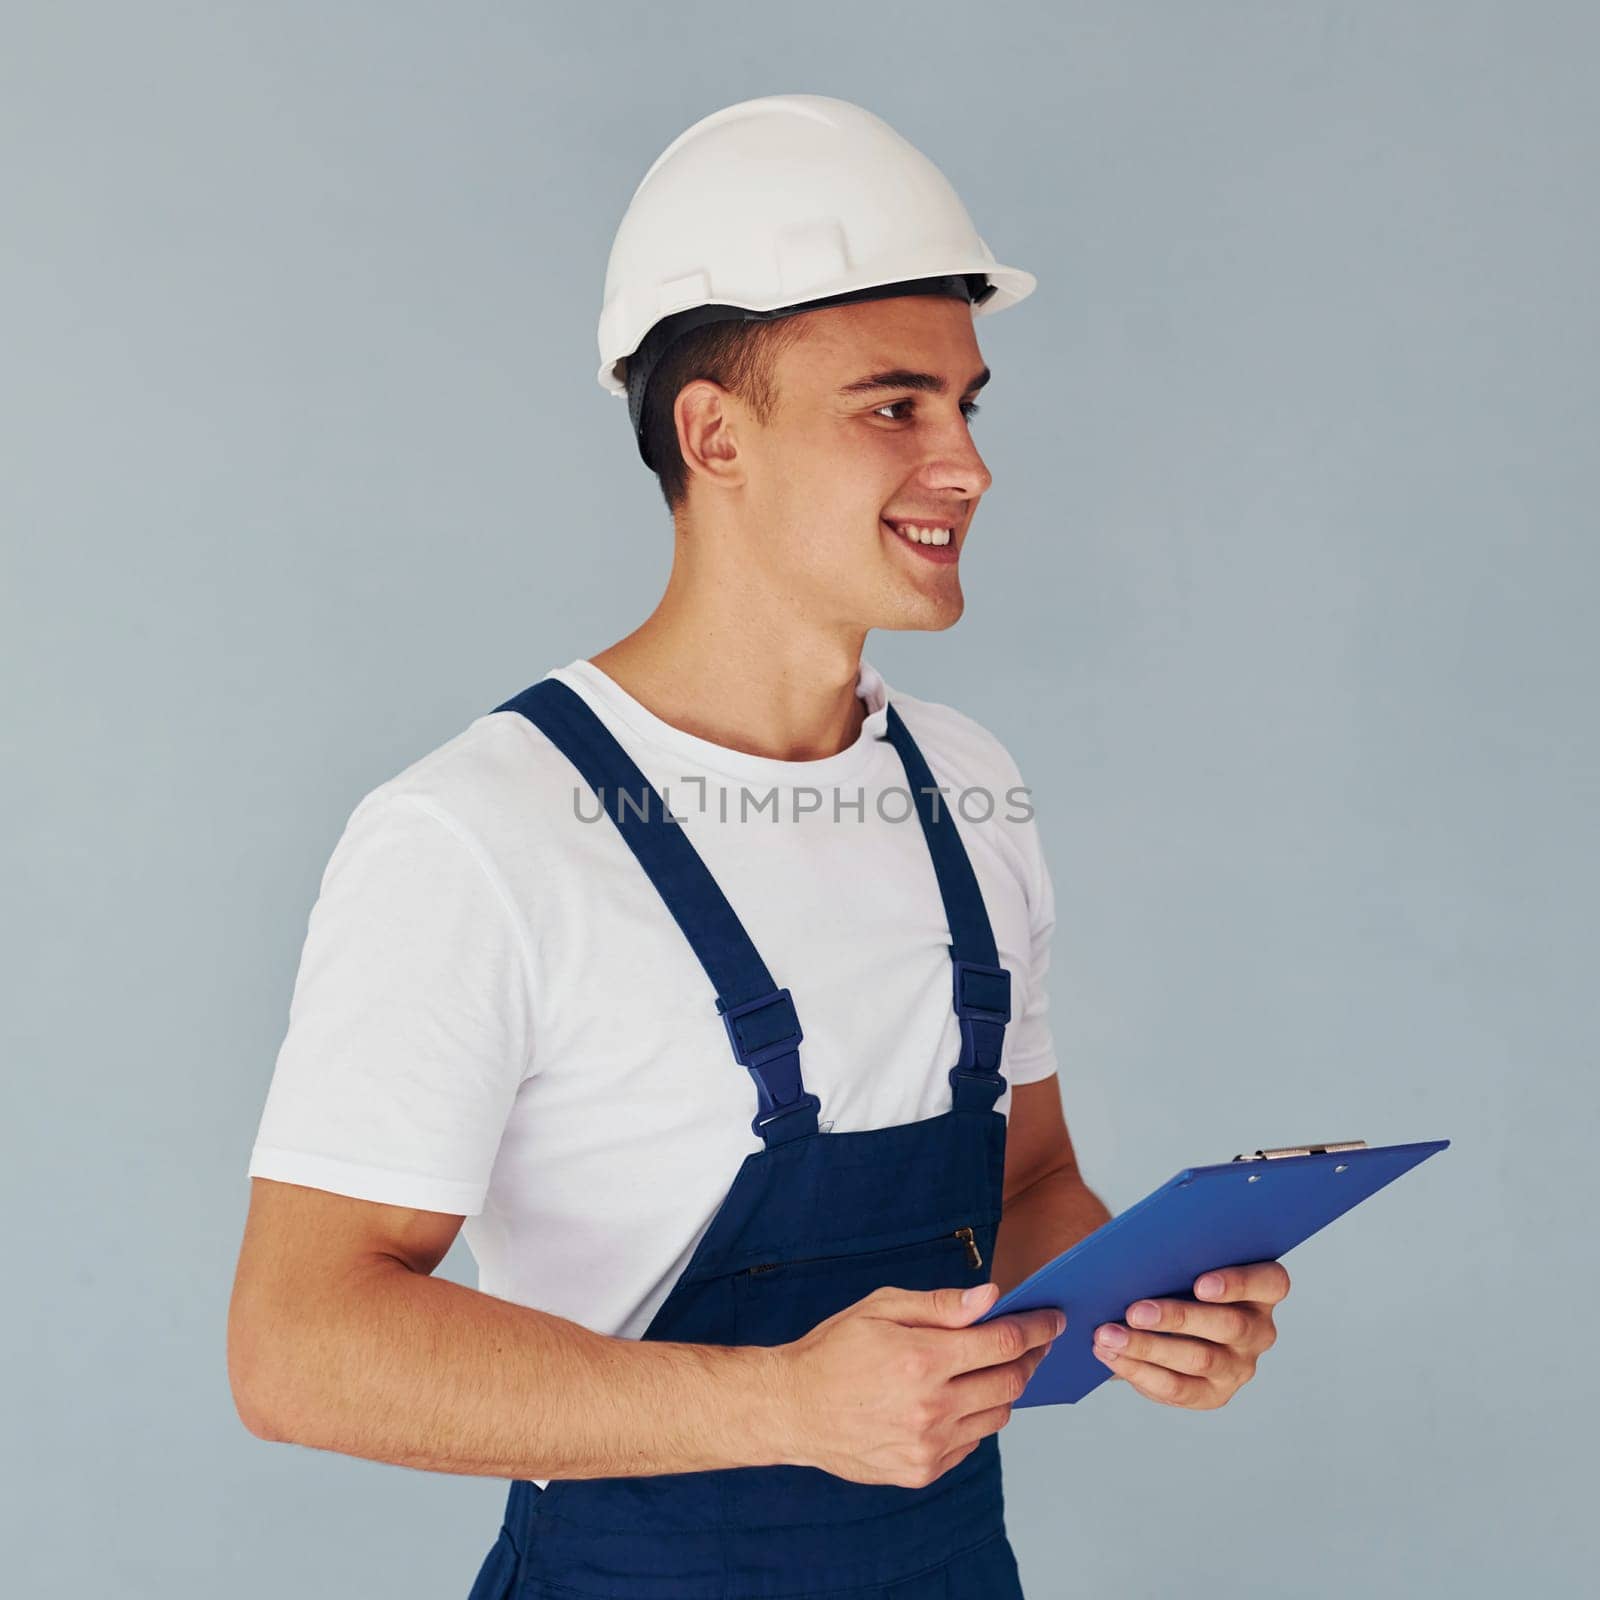 With notepad and hard hat. Male worker in blue uniform standing inside of studio against white background.